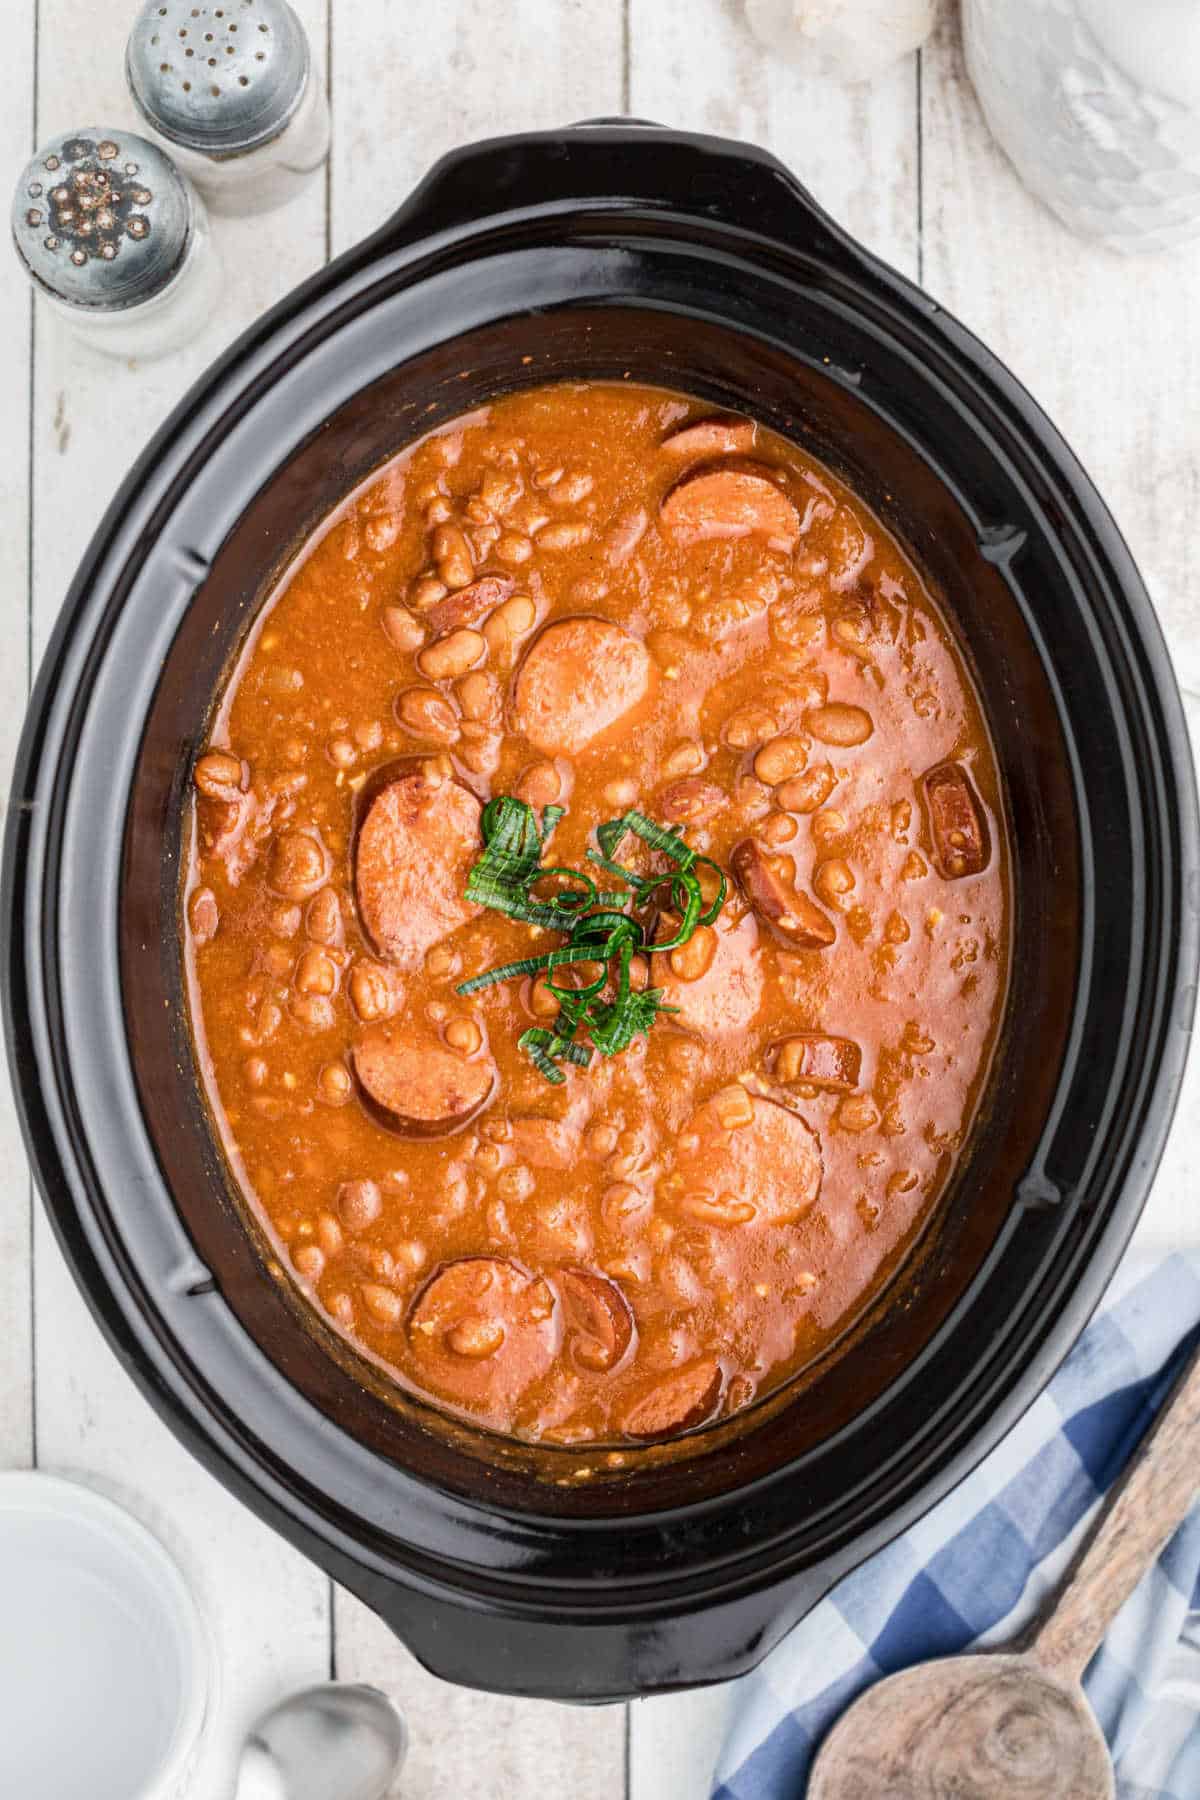 Overhead shot of a slow cooker filled with kielbasa and baked beans.